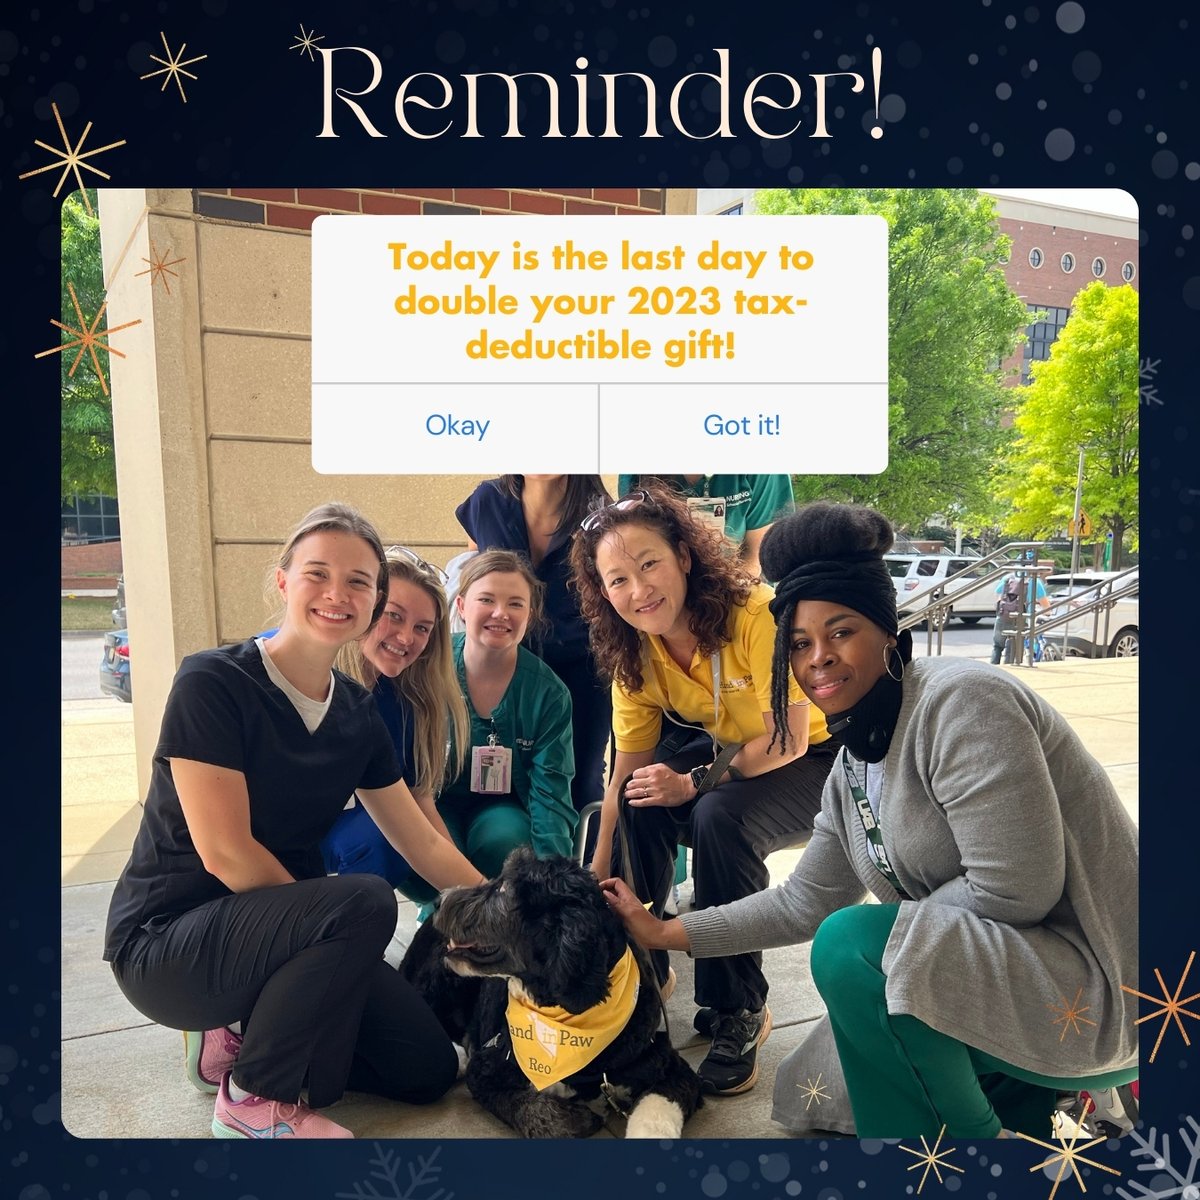 Today is your LAST CHANCE to make a tax-deductible donation for 2023, and we have some exciting news to share❗️Every gift given before midnight TONIGHT will be matched, doubling the impact of your contribution! Donate now at handinpaw.org/donate